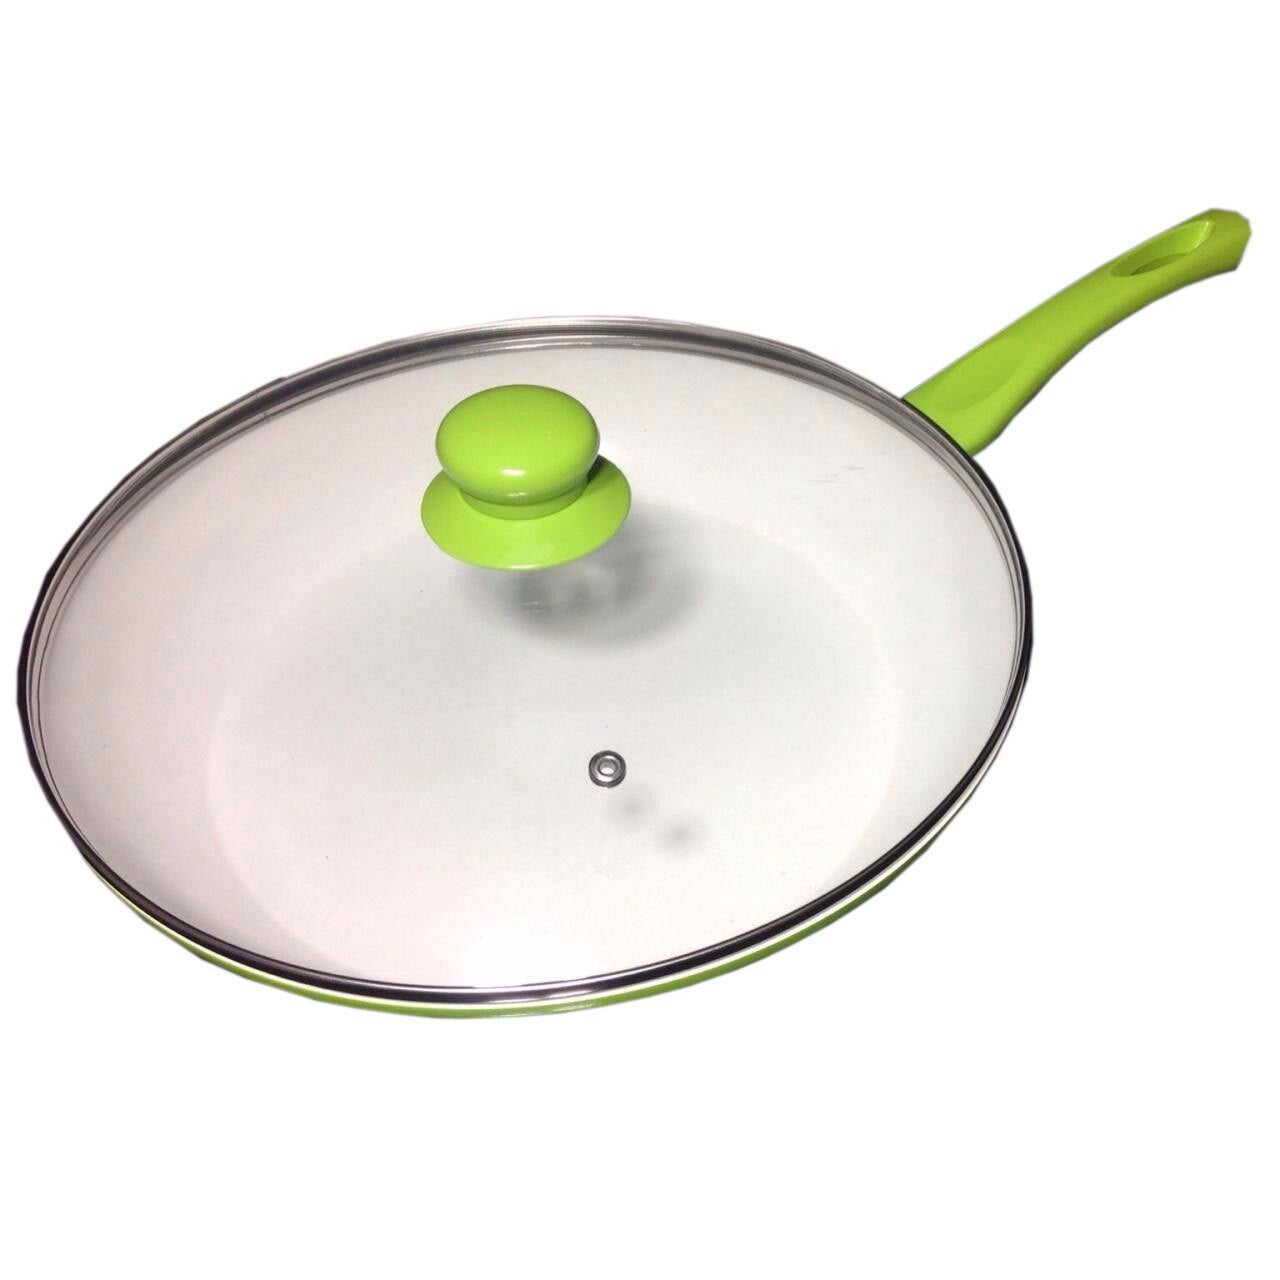 KASA Non-Stick Ceramic Stone Marble Coated Stable Cookware Fry Pan Green